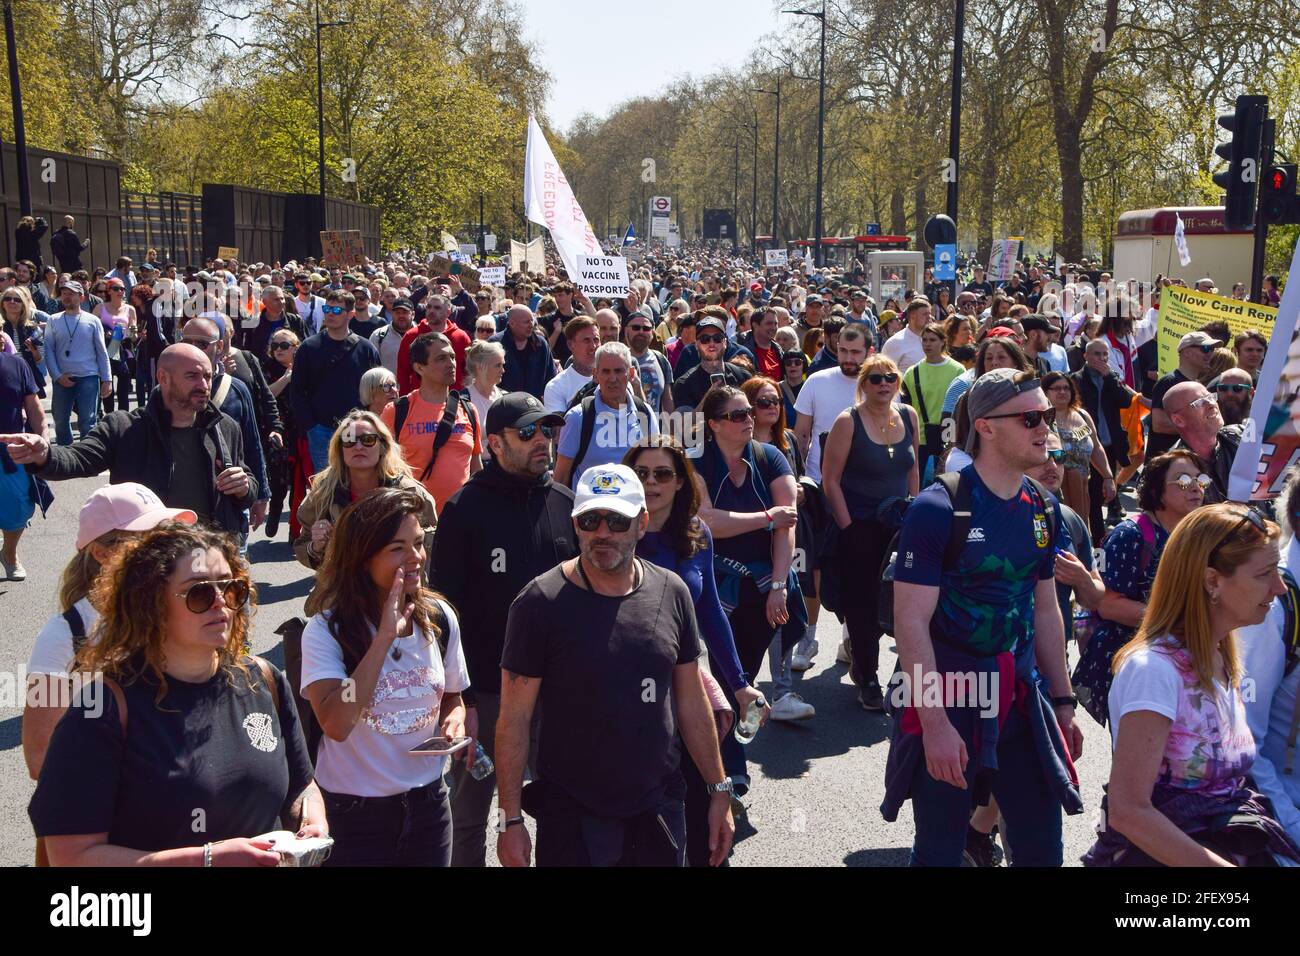 London, United Kingdom. 24th April 2021. Crowds at Marble Arch at the anti-lockdown protest. Thousands of people marched through Central London in protest against health passports, protective masks, Covid vaccines and lockdown restrictions. Credit: Vuk Valcic/Alamy Live News Stock Photo